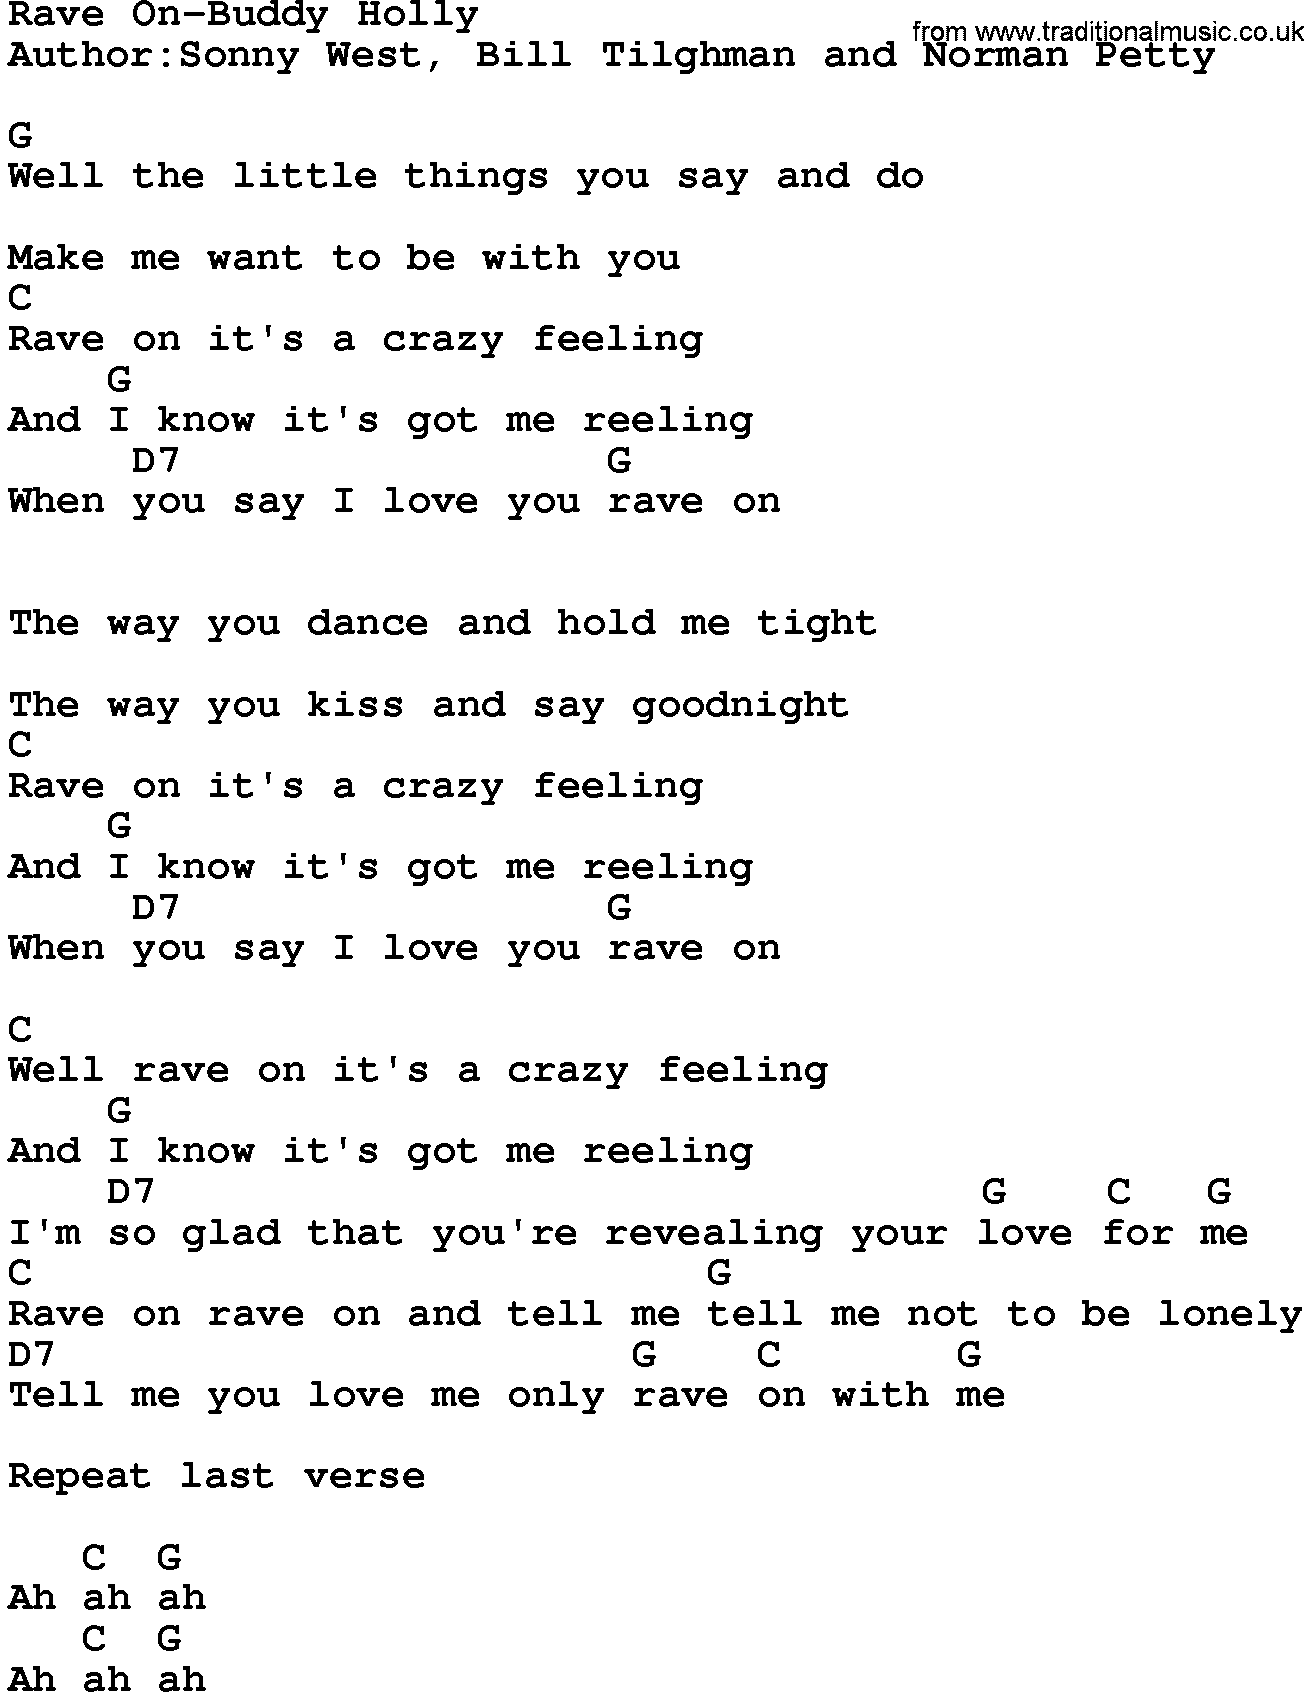 Country music song: Rave On-Buddy Holly lyrics and chords